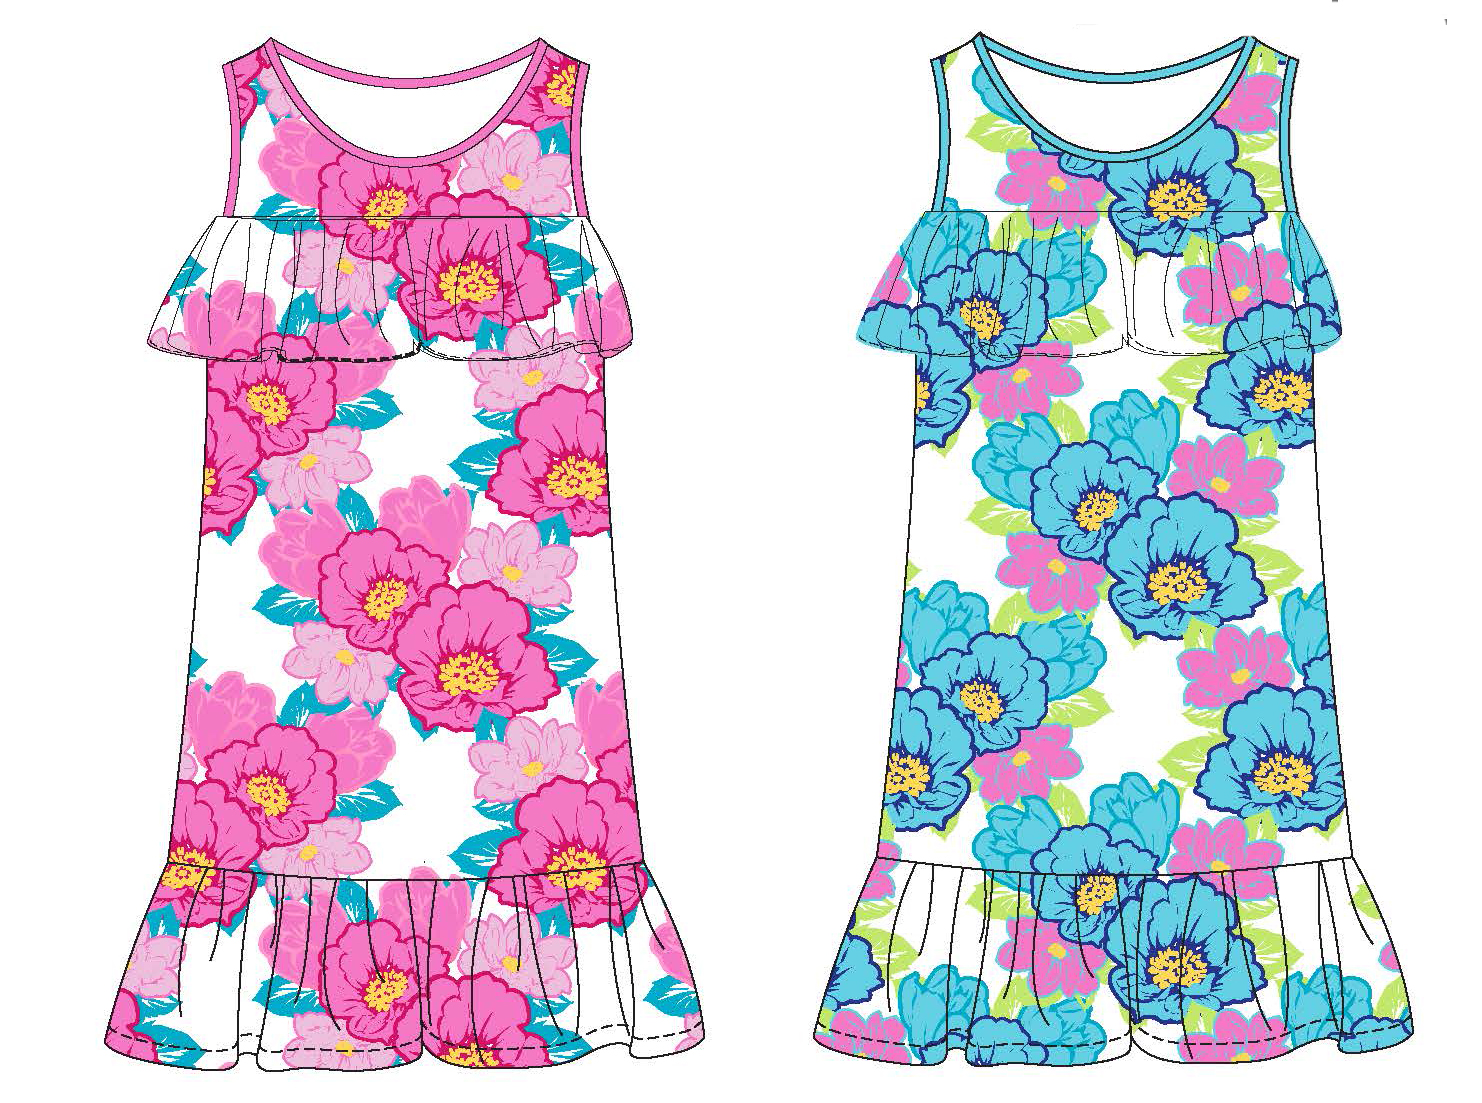 Toddler Girl's Sleeveless Knit Swing Dress w/ Hibiscus Floral Print - Size 2T-4T